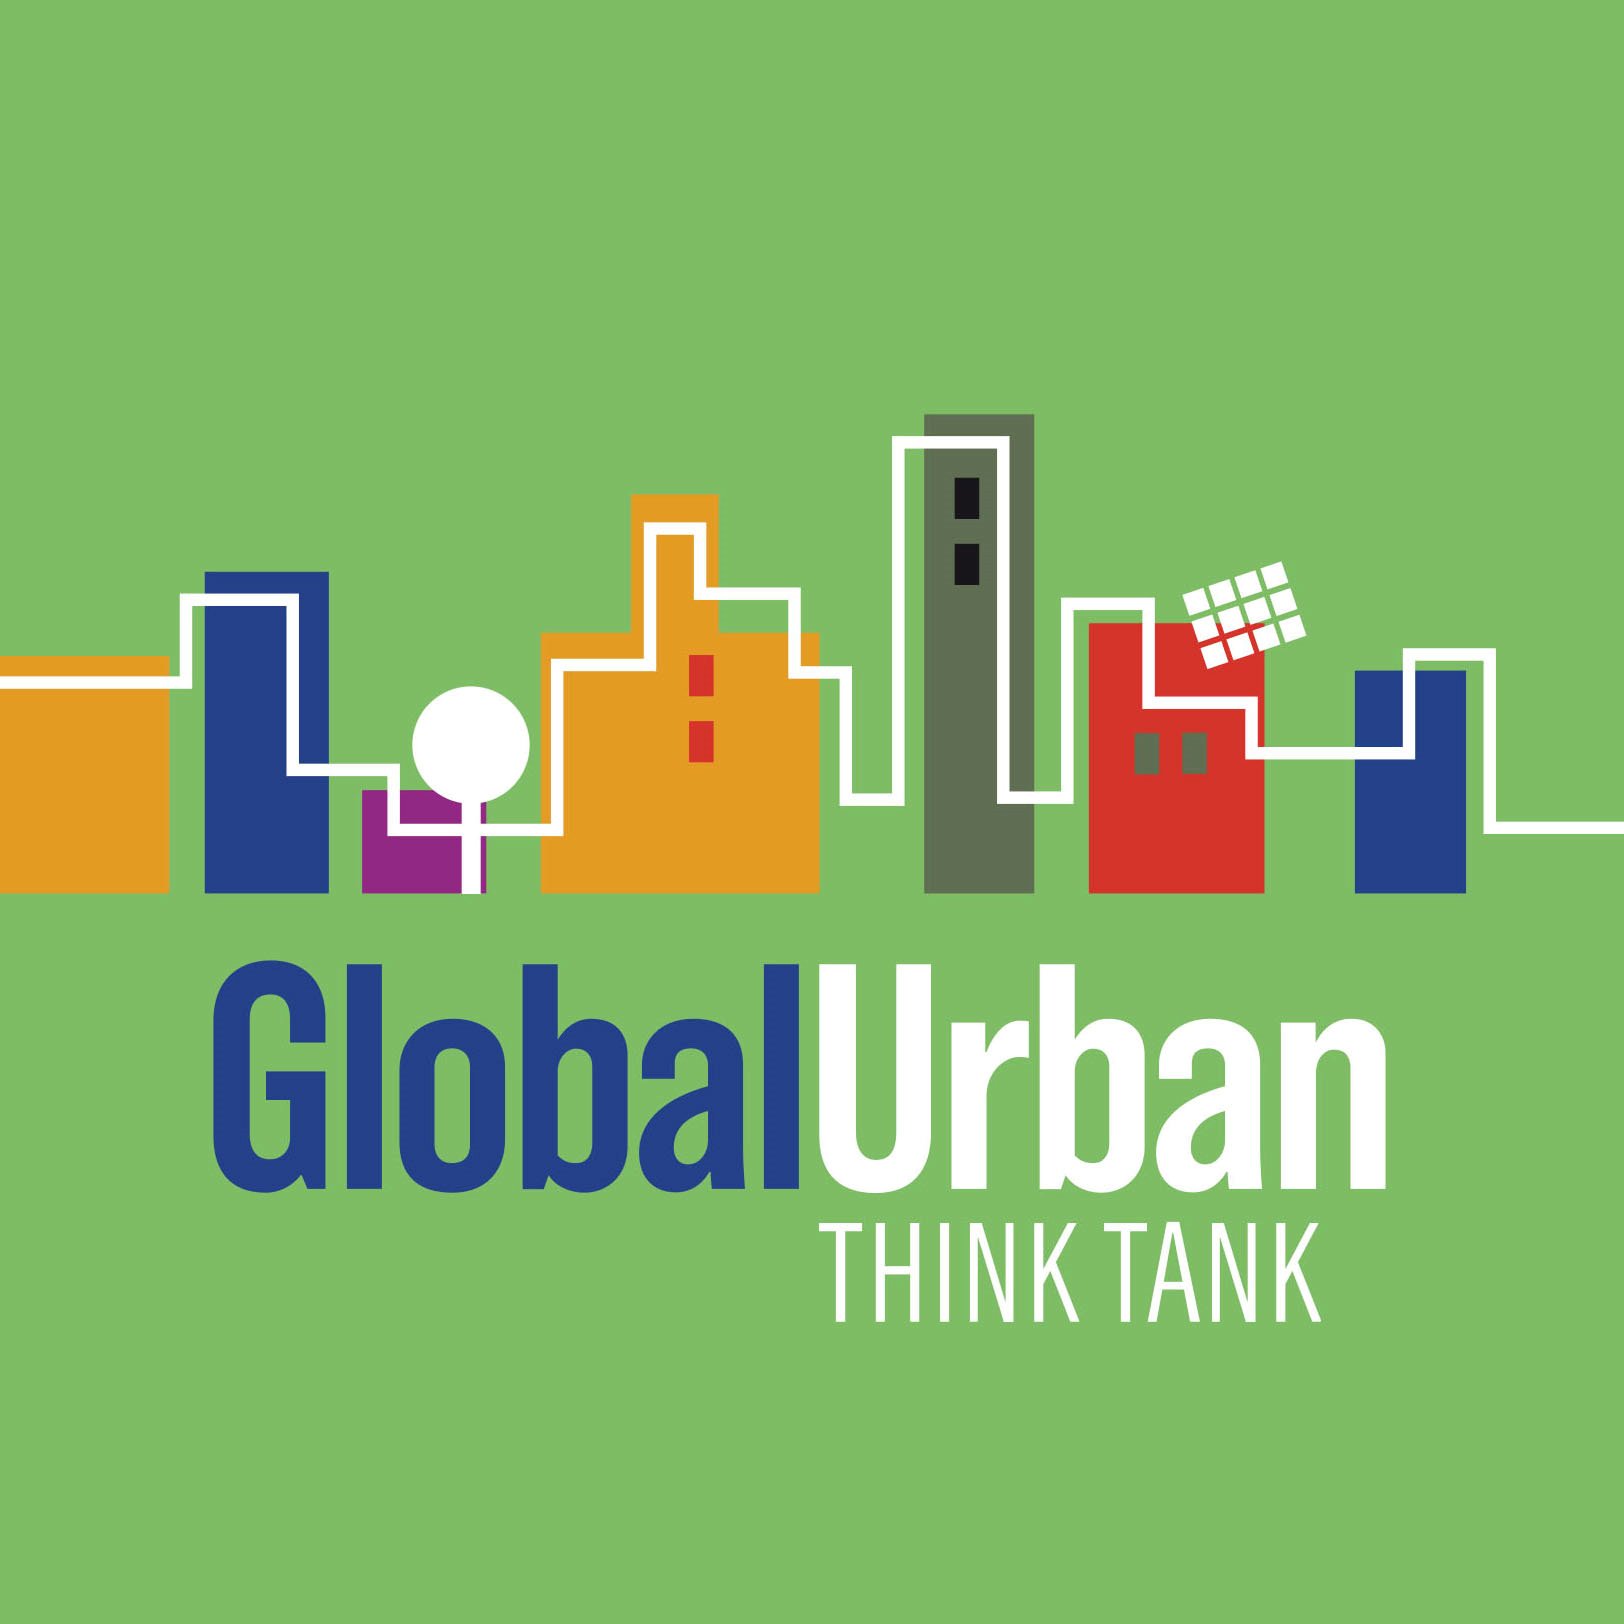 Our team is international & our approach is global. Our partners are NGOs & universities #Urbanplanning #SustainableCities #SDG #Agenda2030 #Environment #Africa